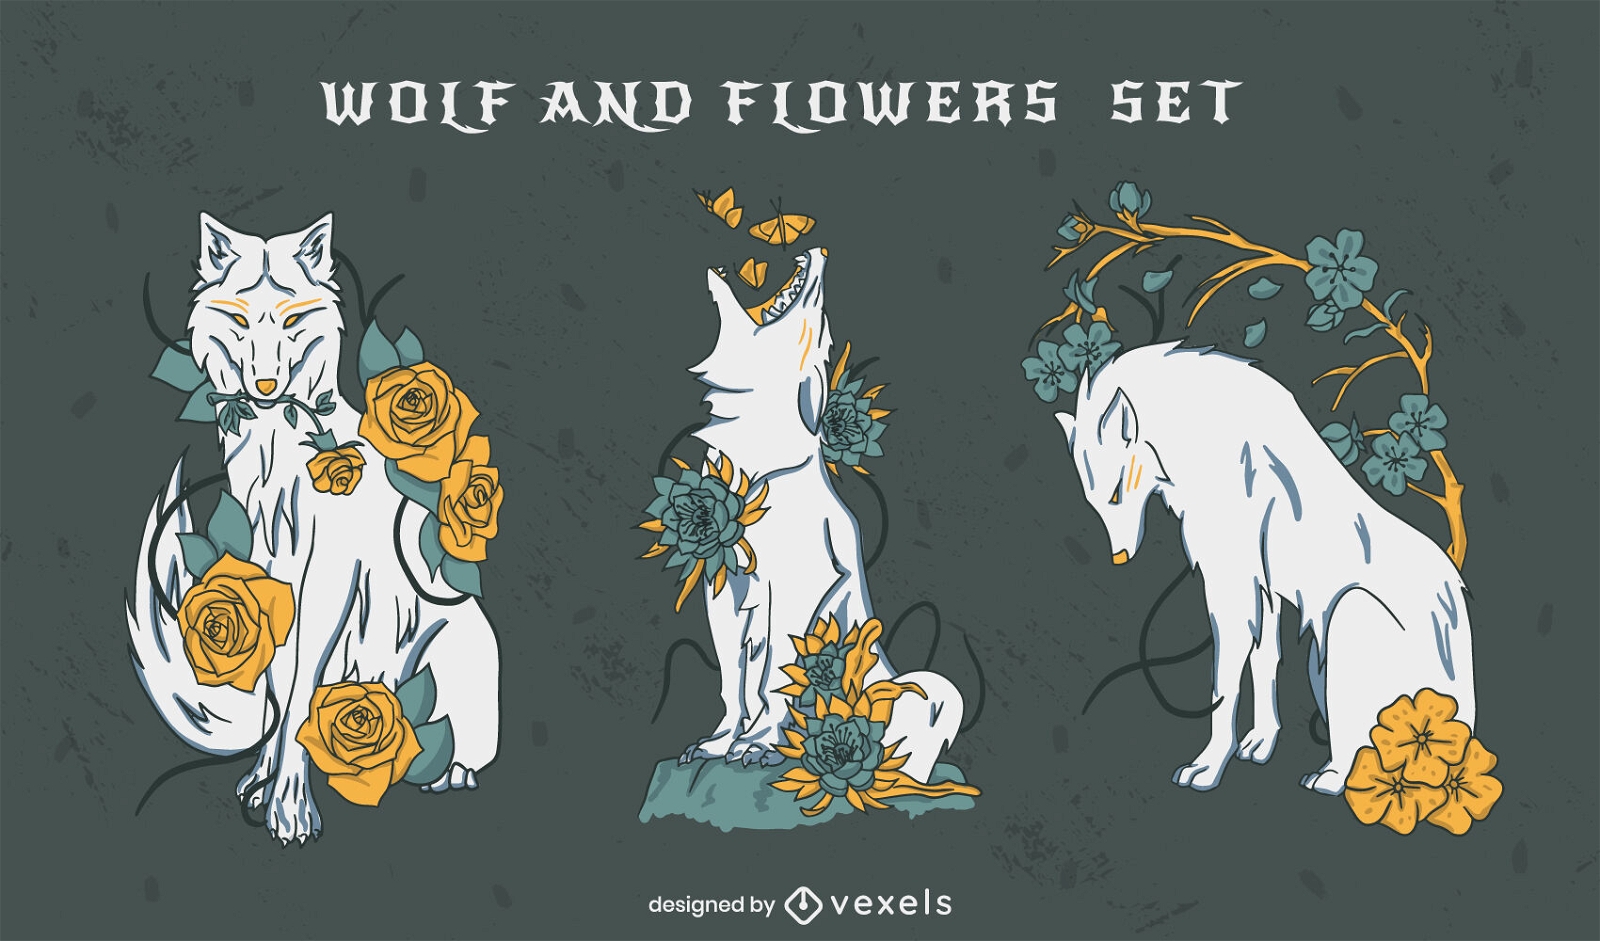 Wolf and flowers character set